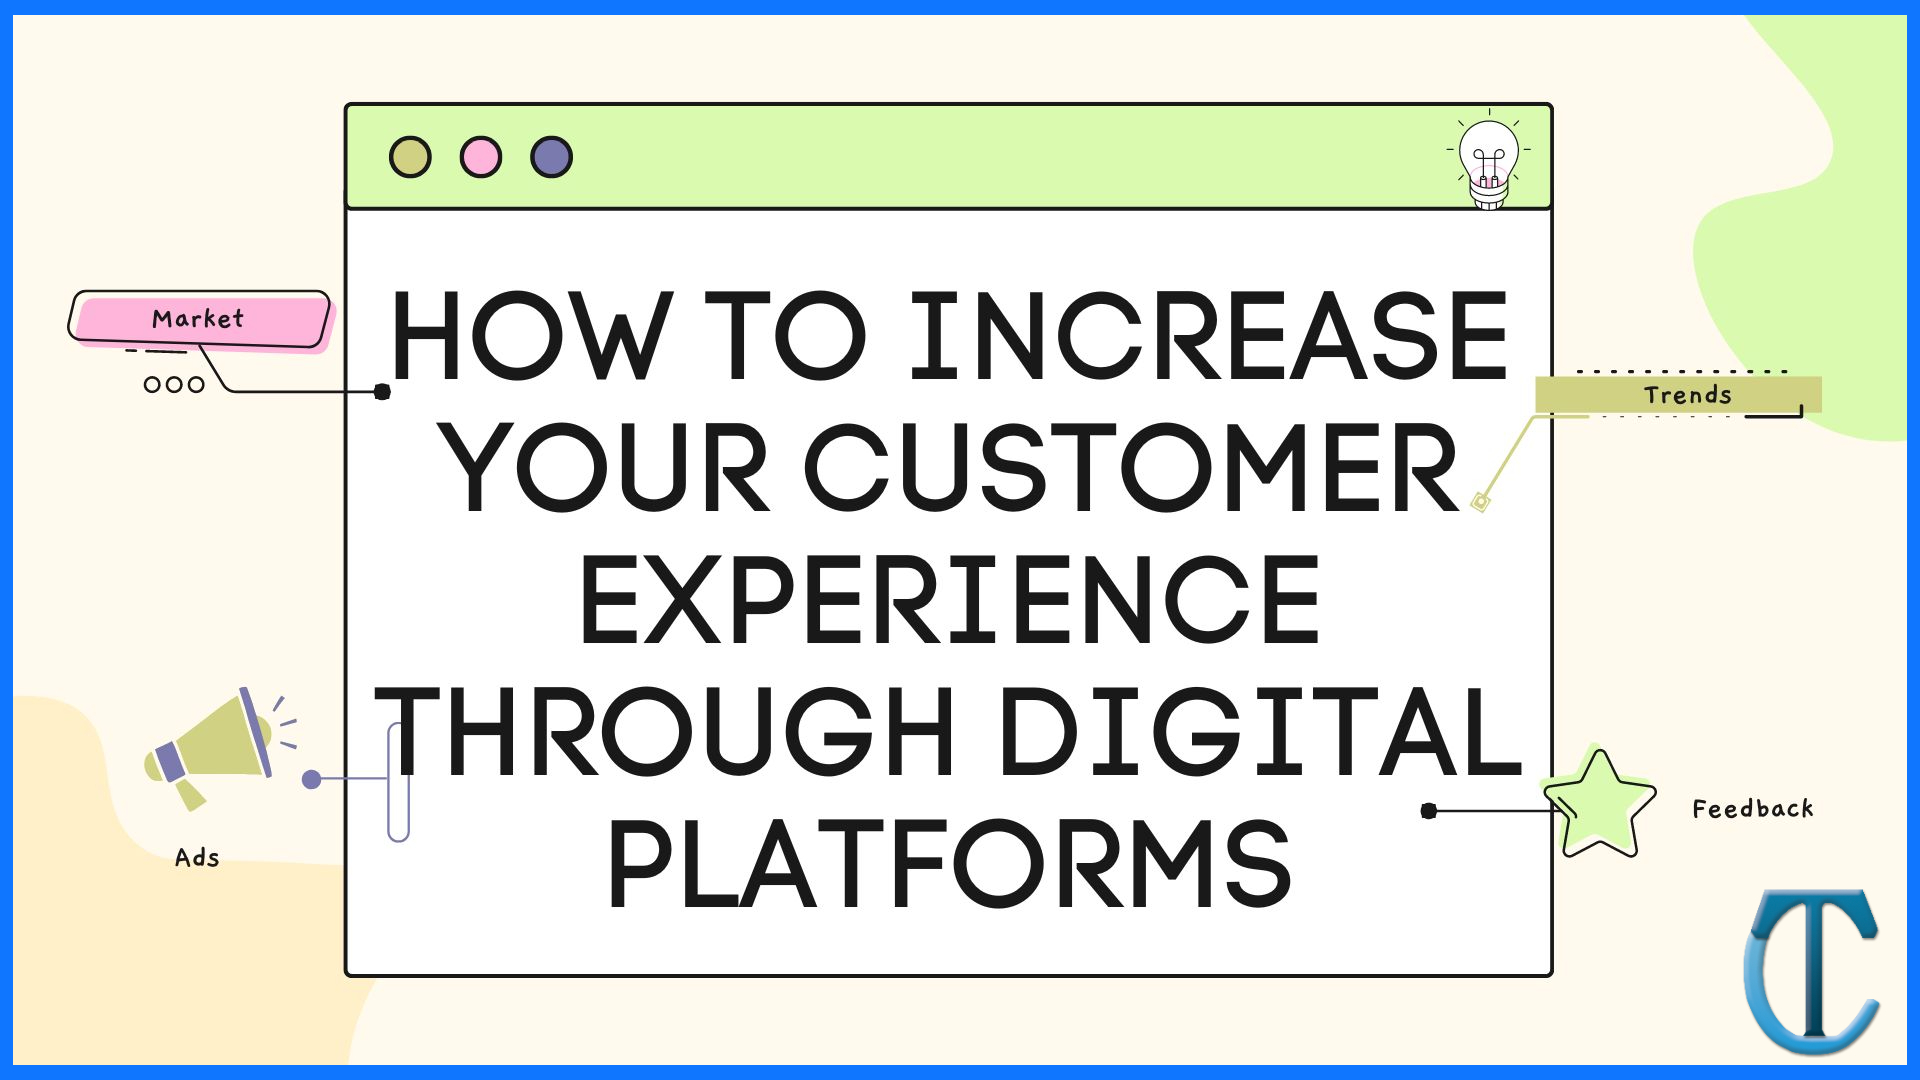 How to Increase Your Customer Experience Through Digital platforms?